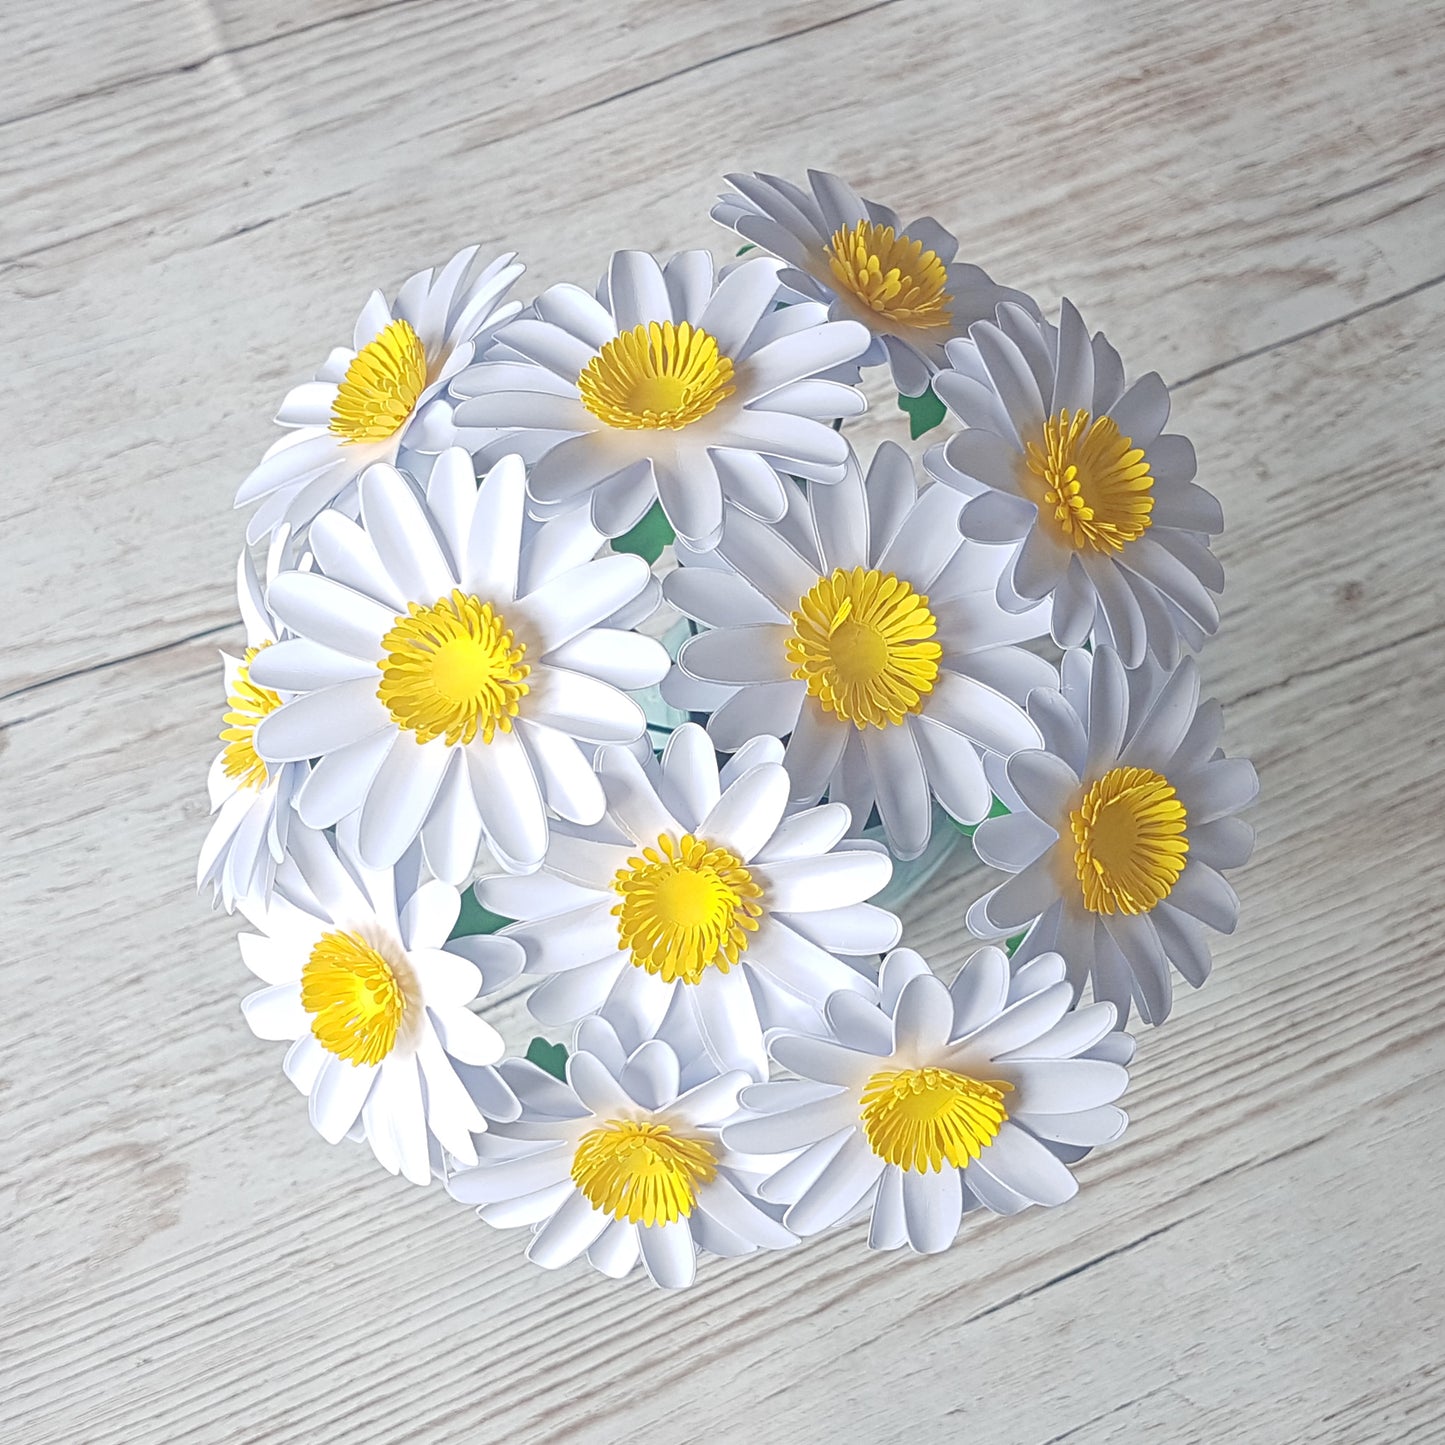 Bunch of paper daisies